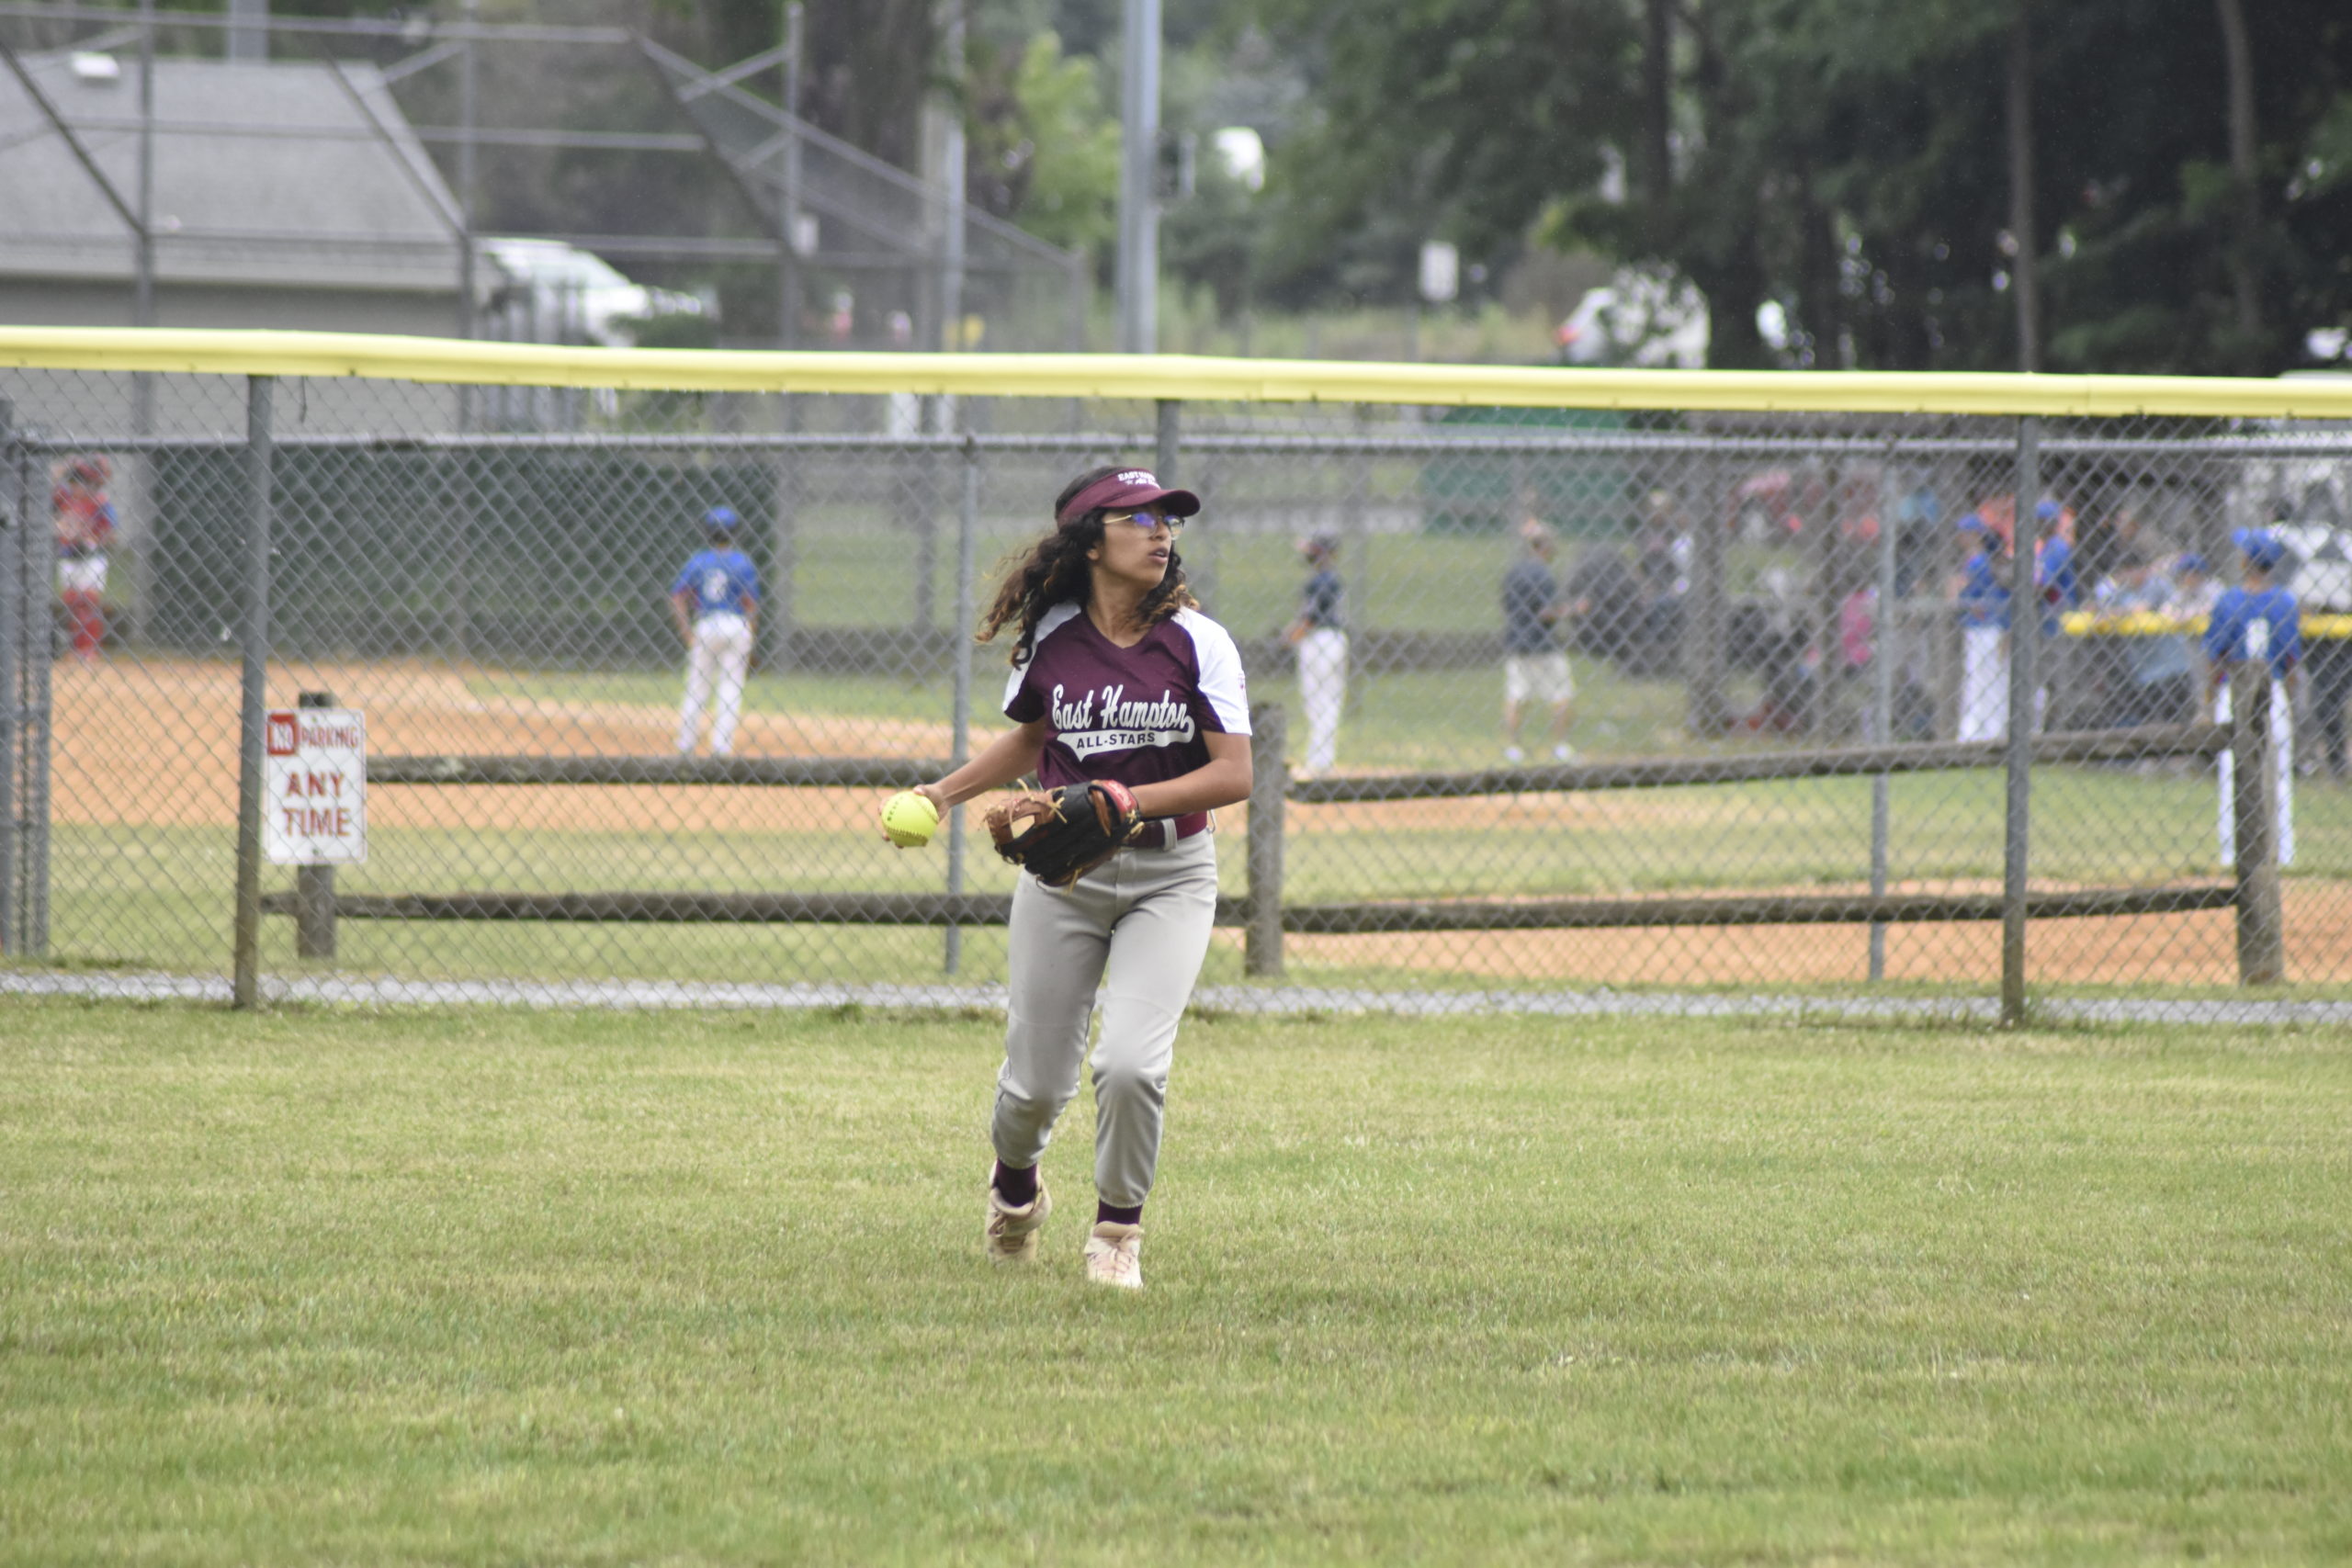 East Hampton centerfielder Emily Hurtado catches a fly ball and makes the final out to keep North Shore off the scoreboard in the bottom of the first inning.